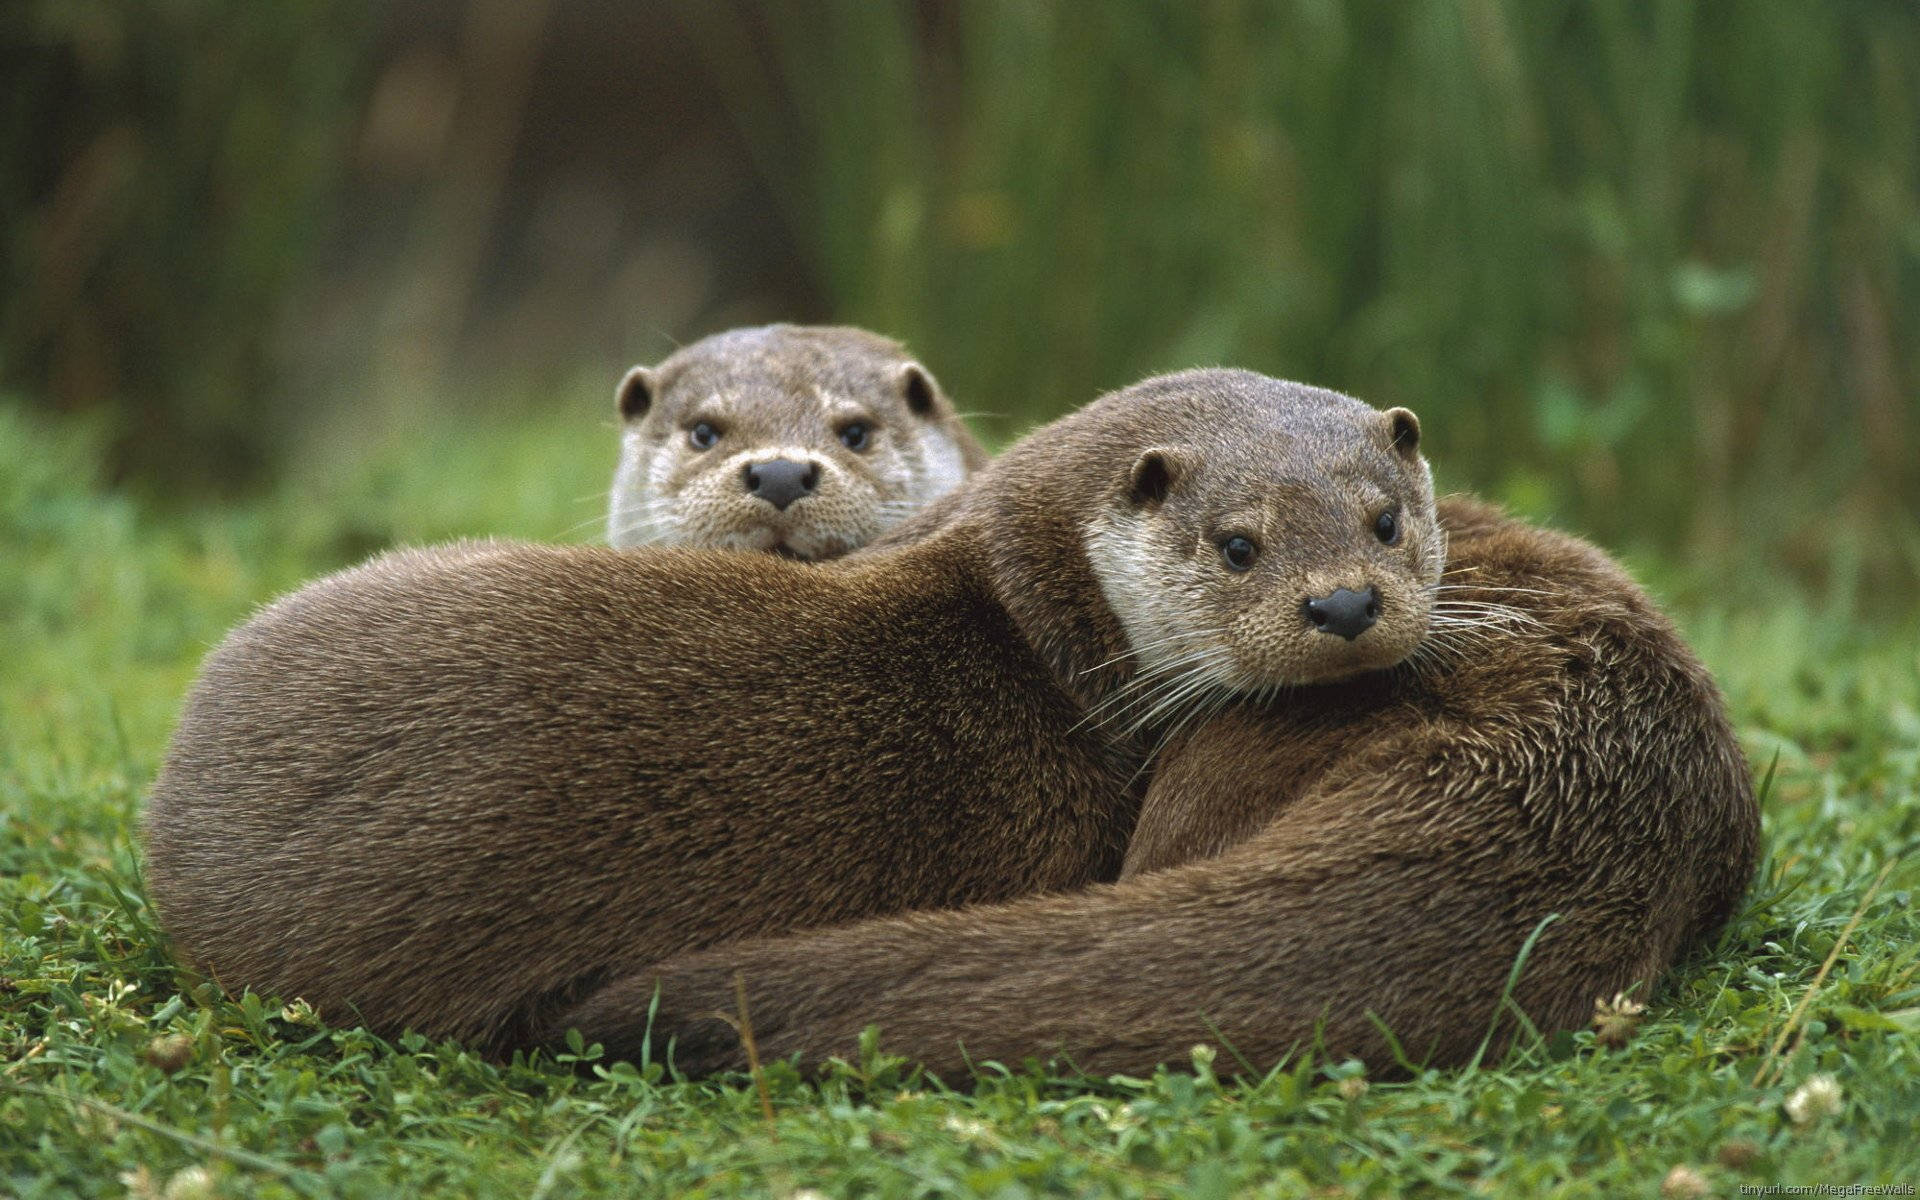 Two Big Otters